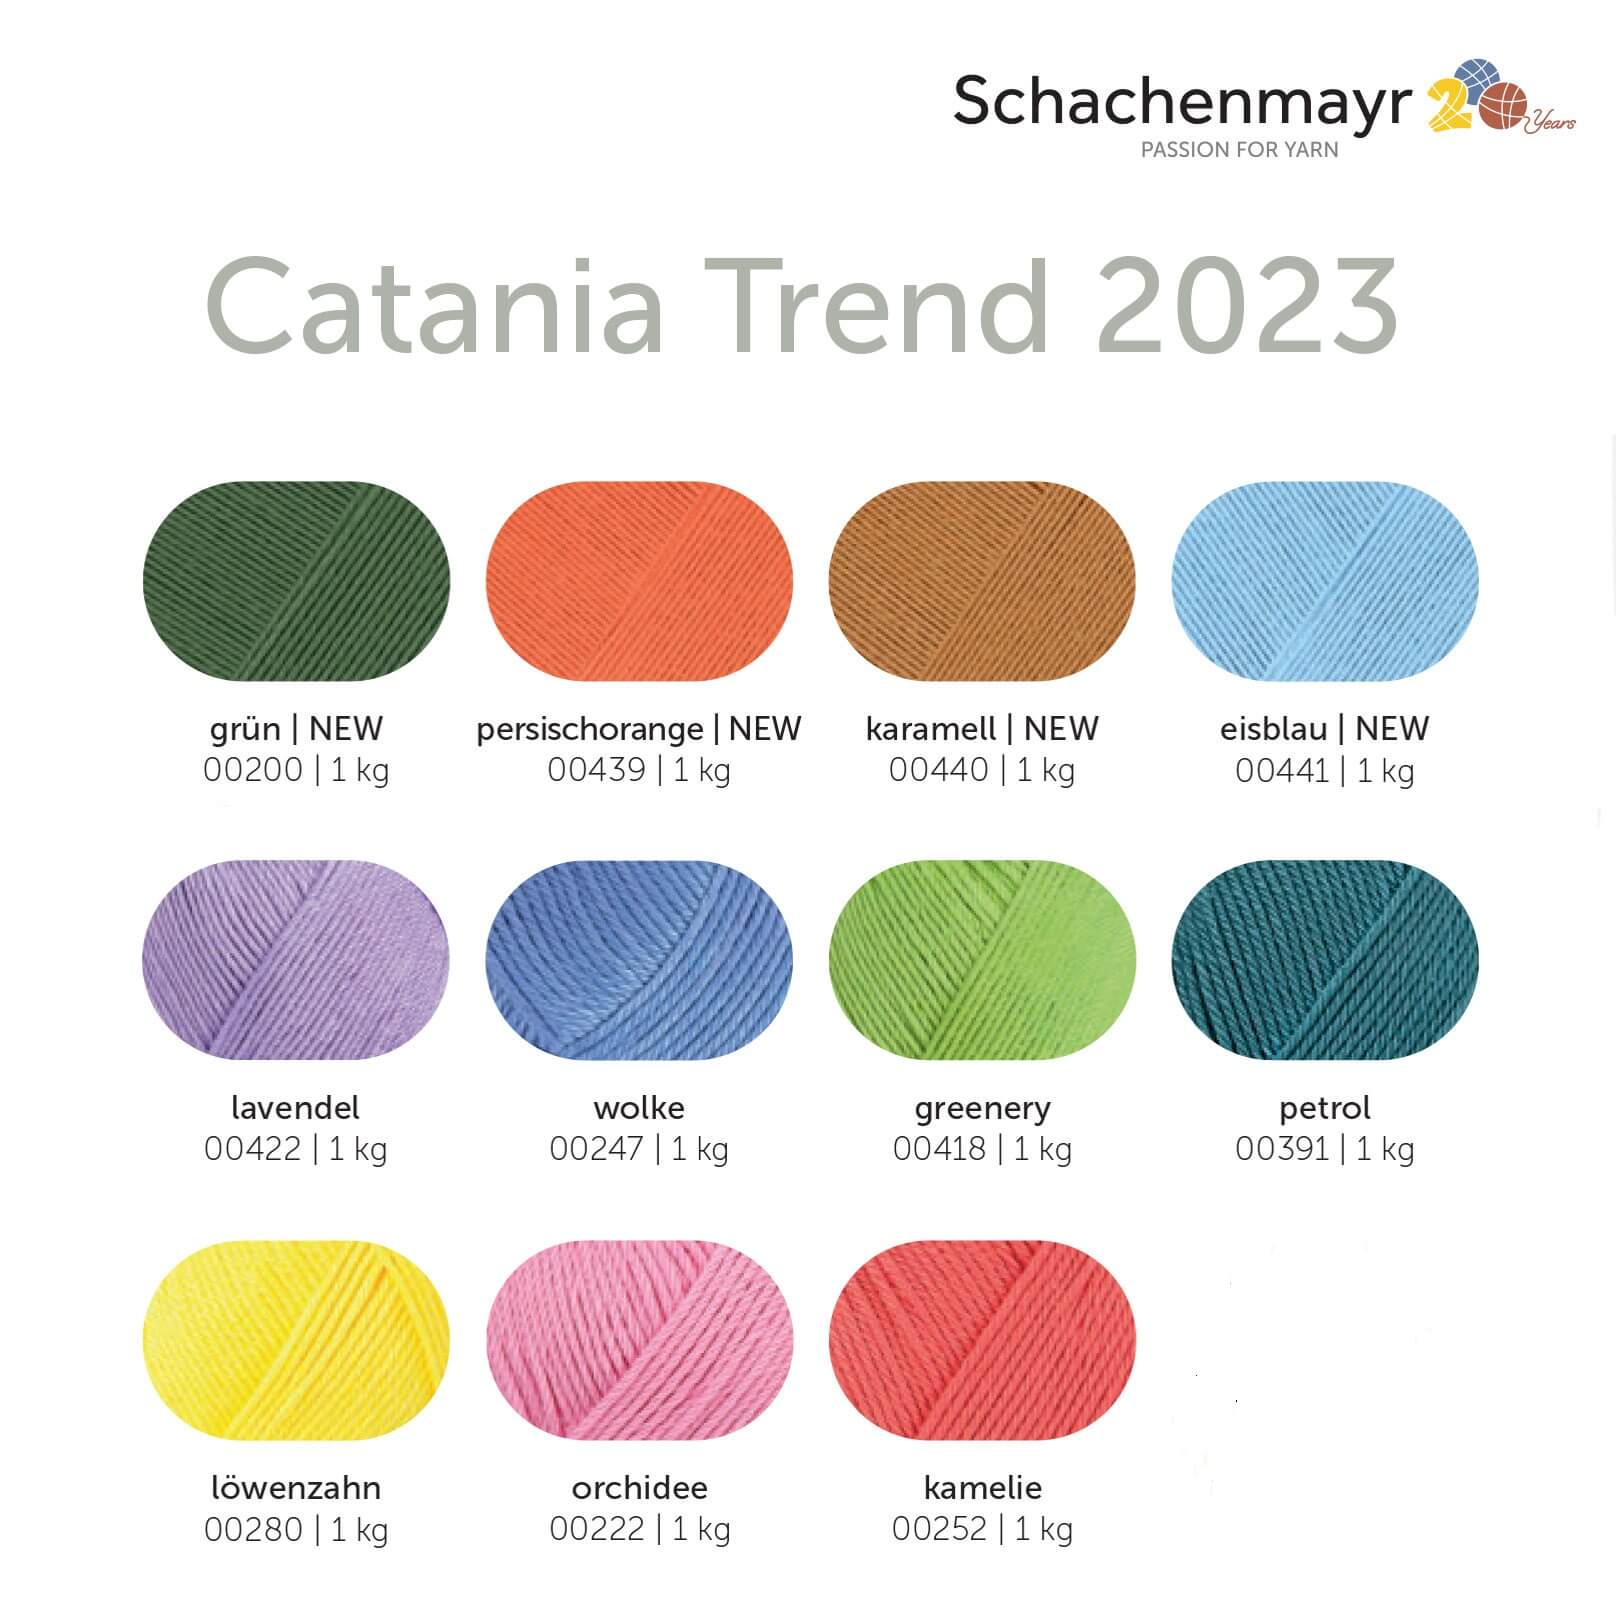 Schachenmayr Catania Trend 2023 - limited edition